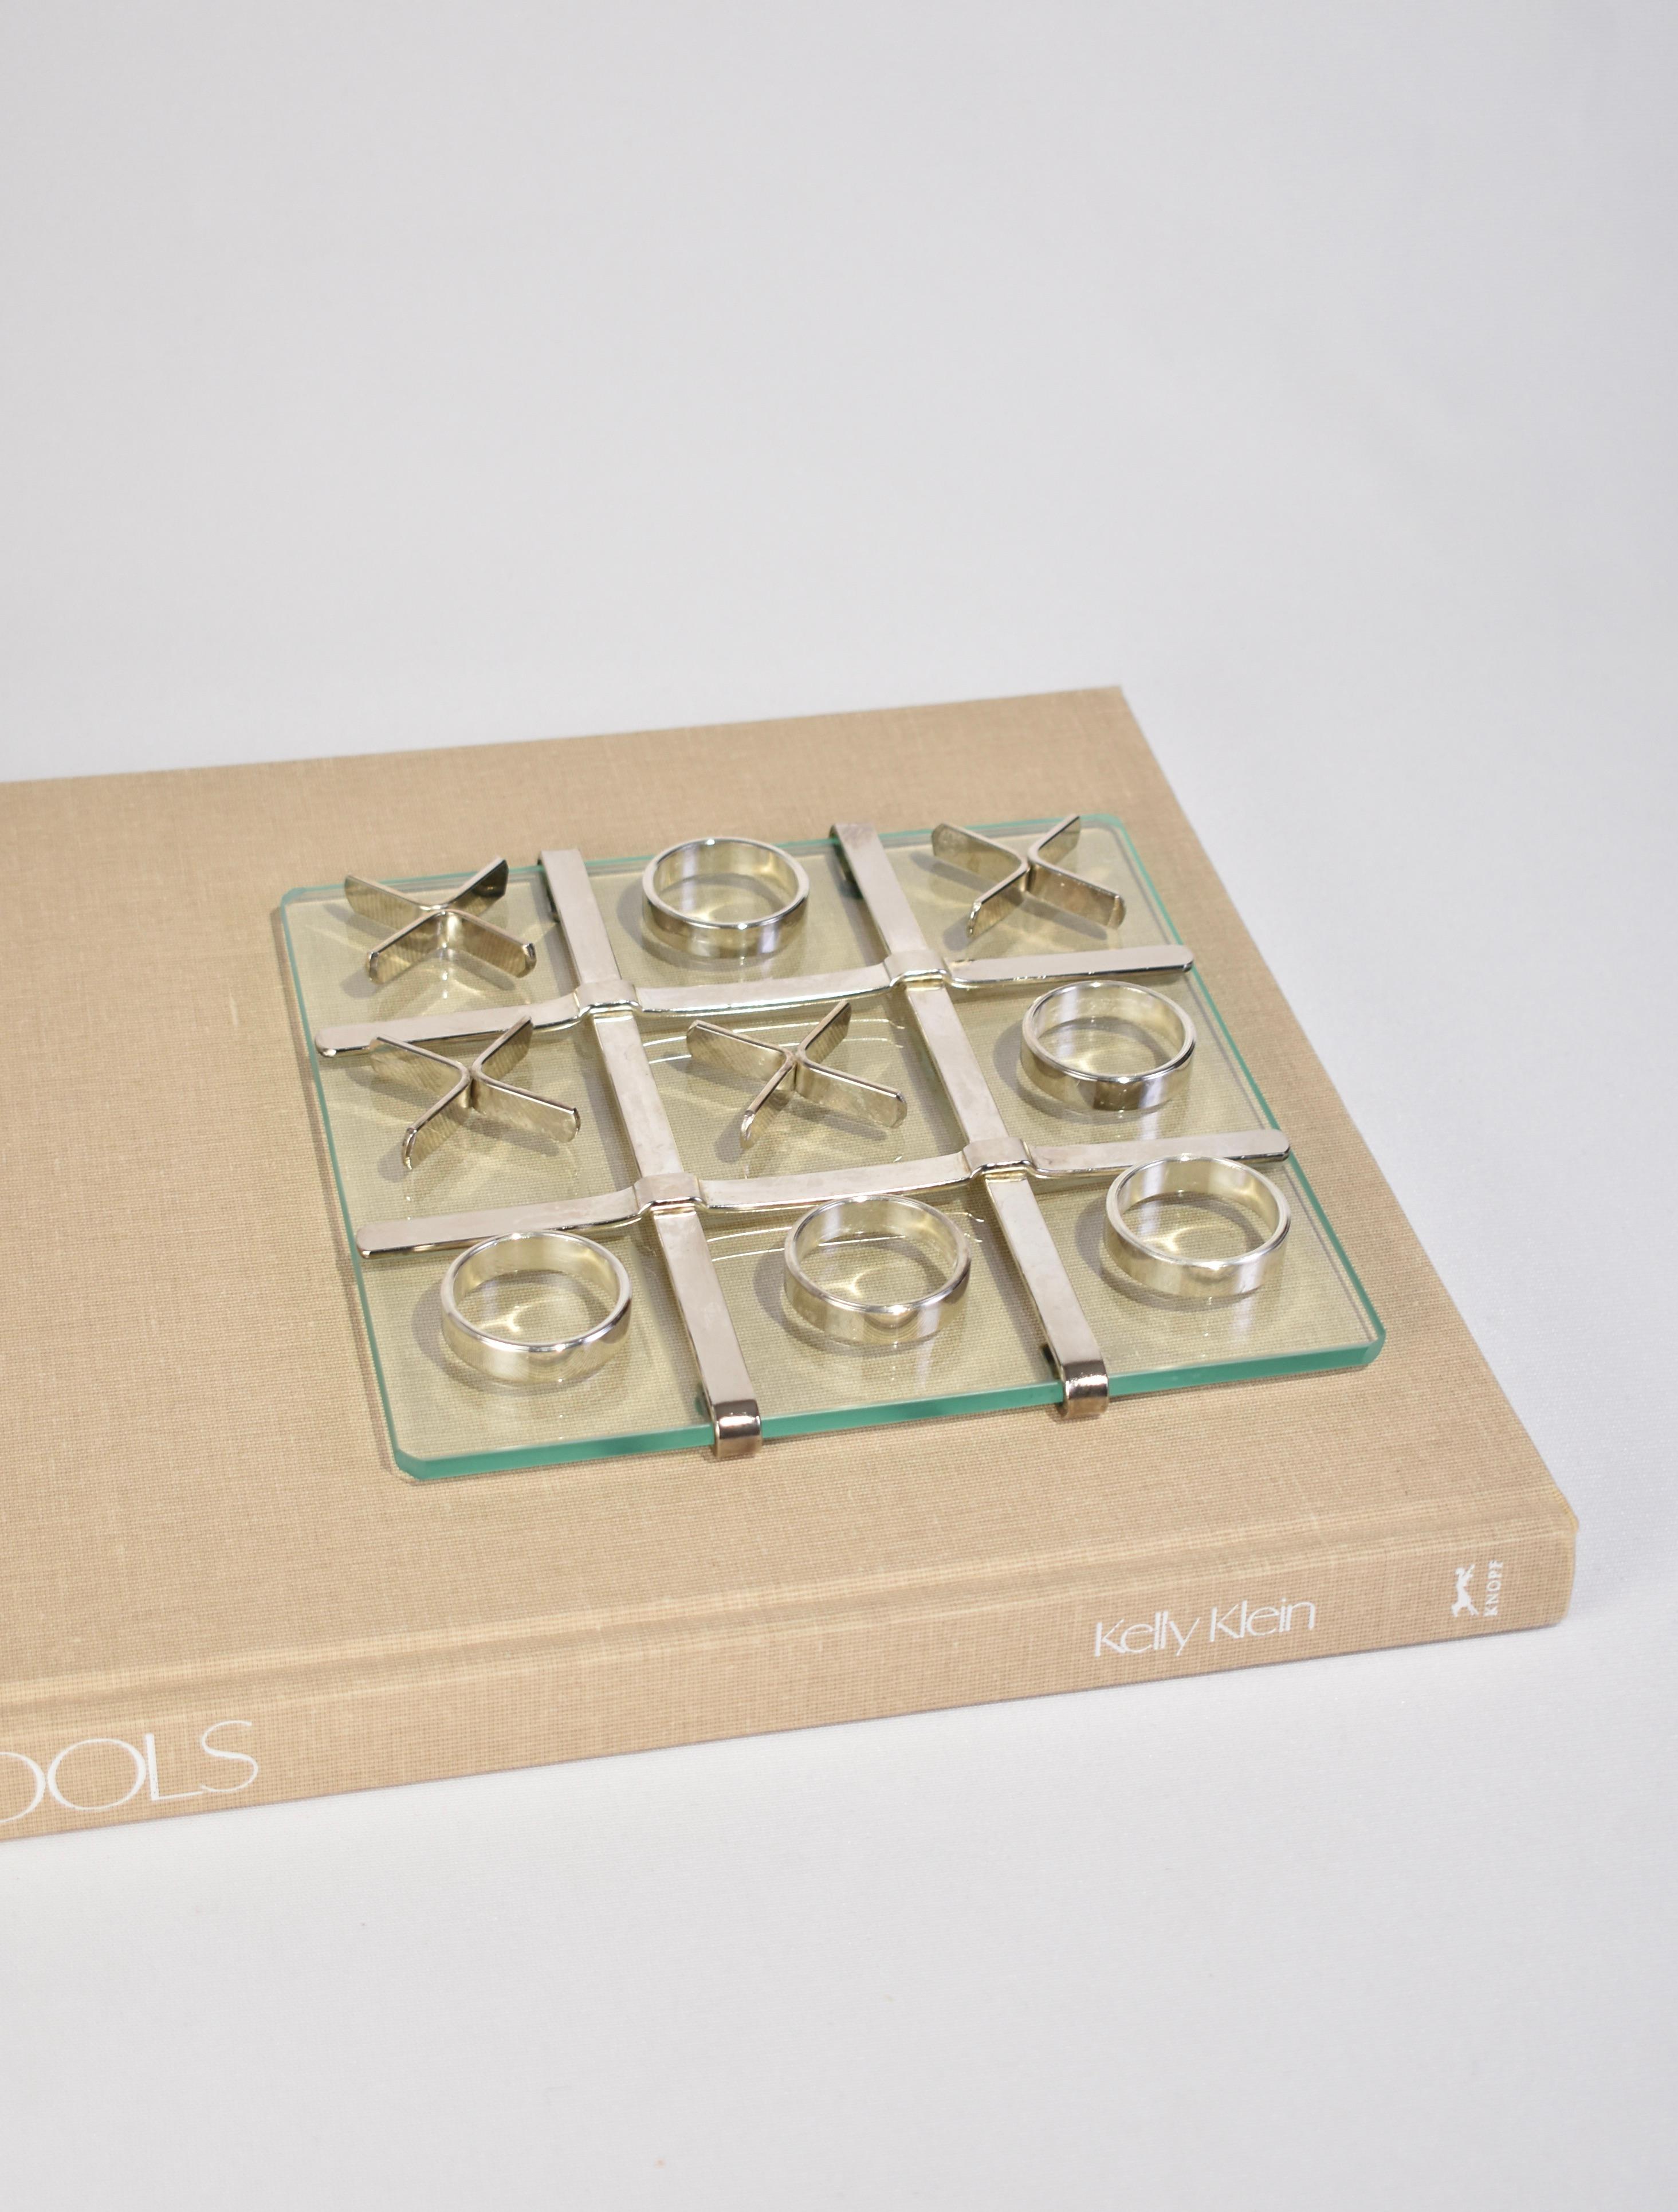 Stunning vintage tic-tac-toe set with a glass base, silver detail and ten silver pieces.

Dimensions:
Board measures 8